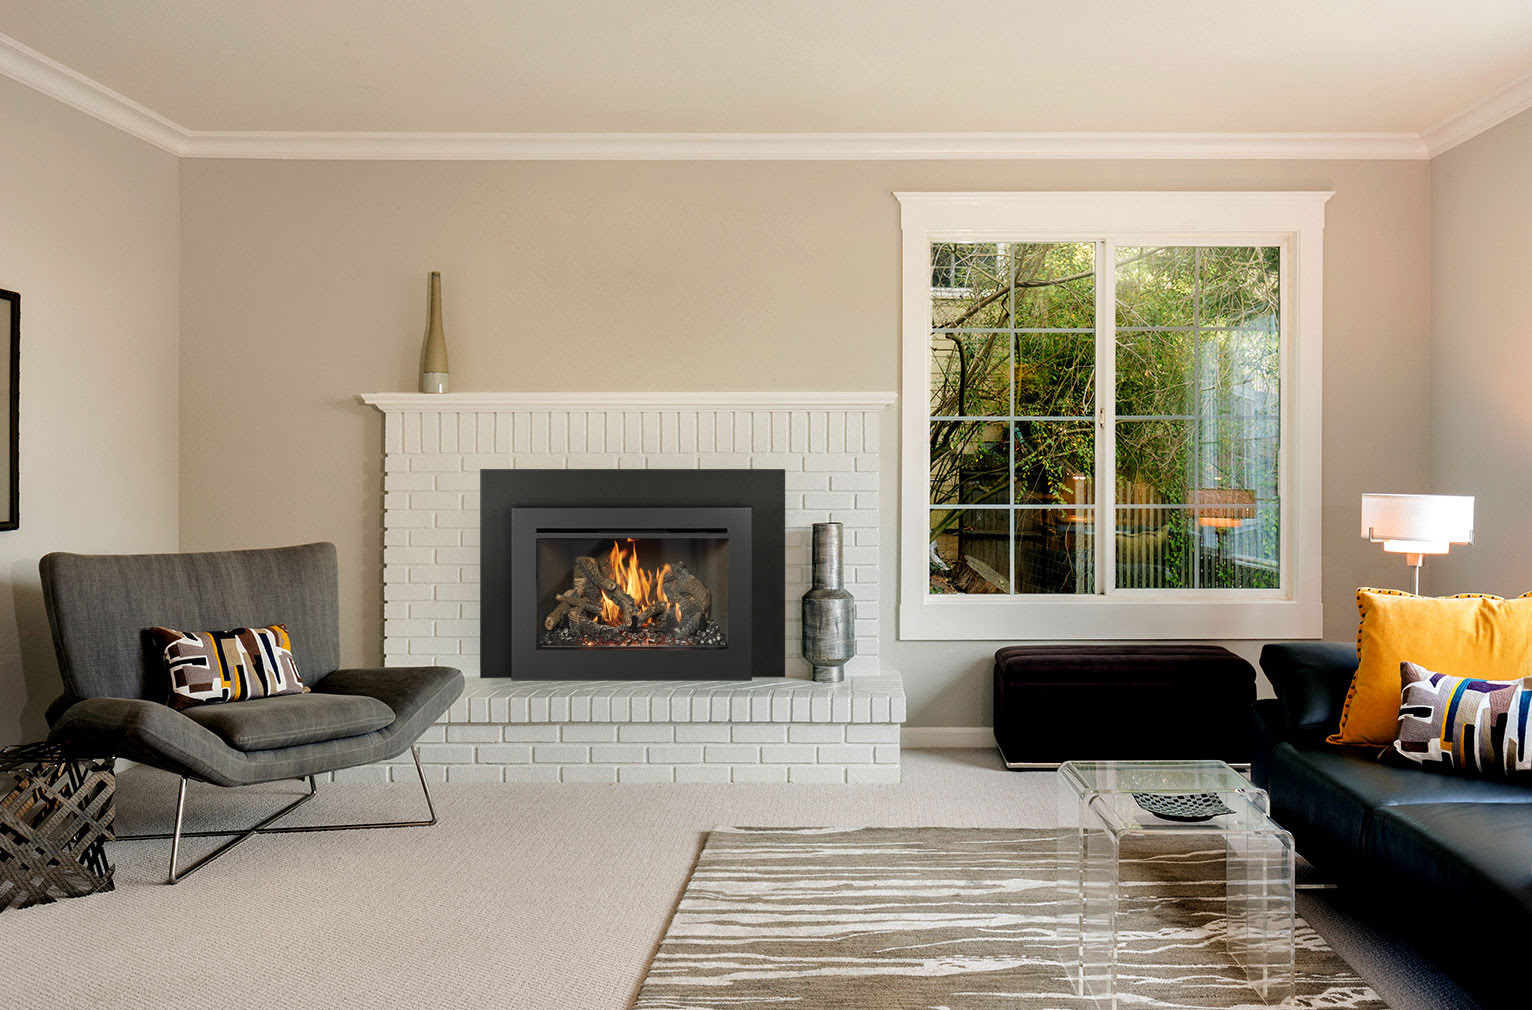 How Much Is A Gas Insert Fireplace Cost